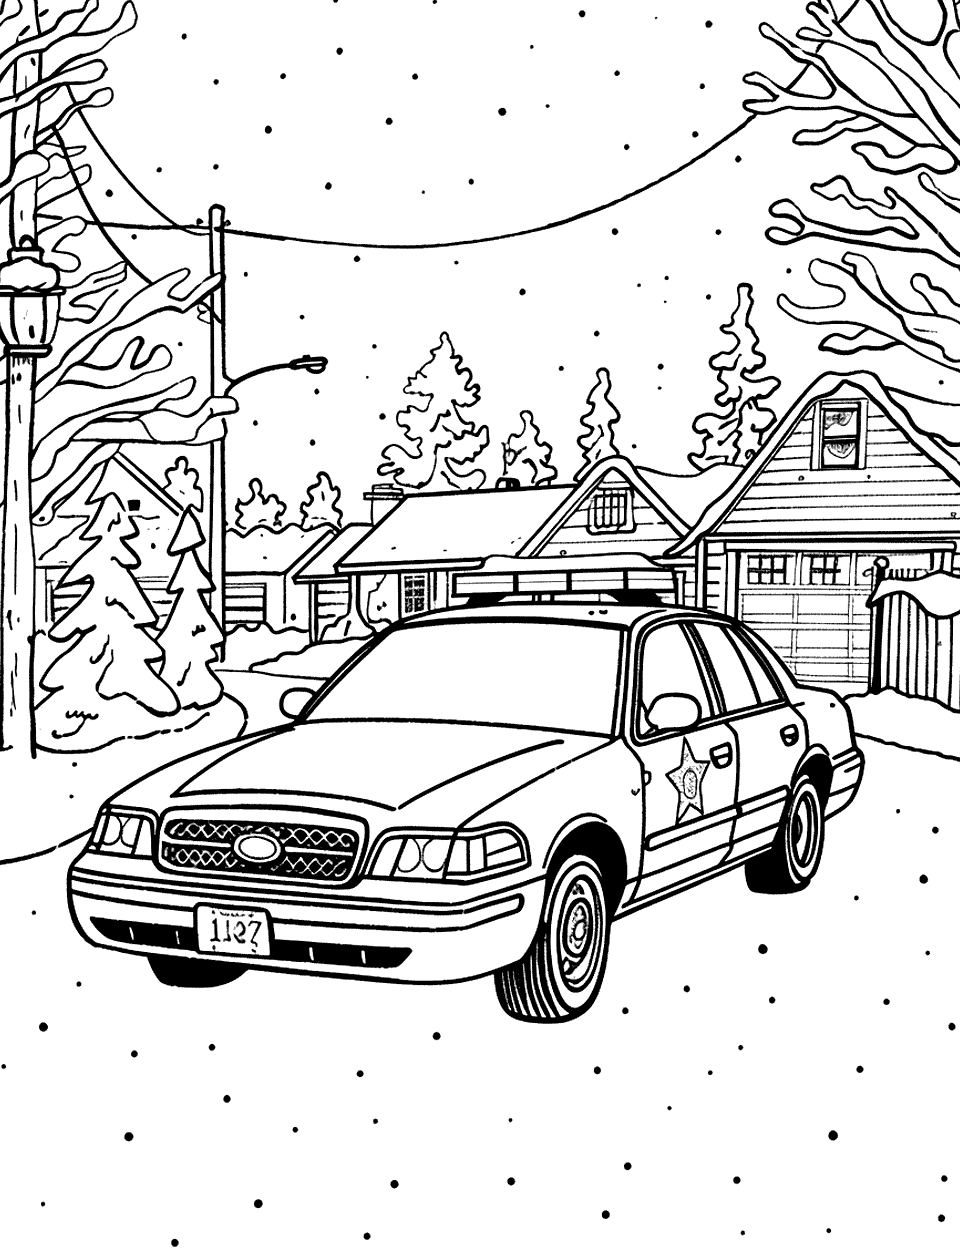 Morning Patrol in the Snow Police Car Coloring Page - A police car slowly patrols a snow-covered neighborhood.